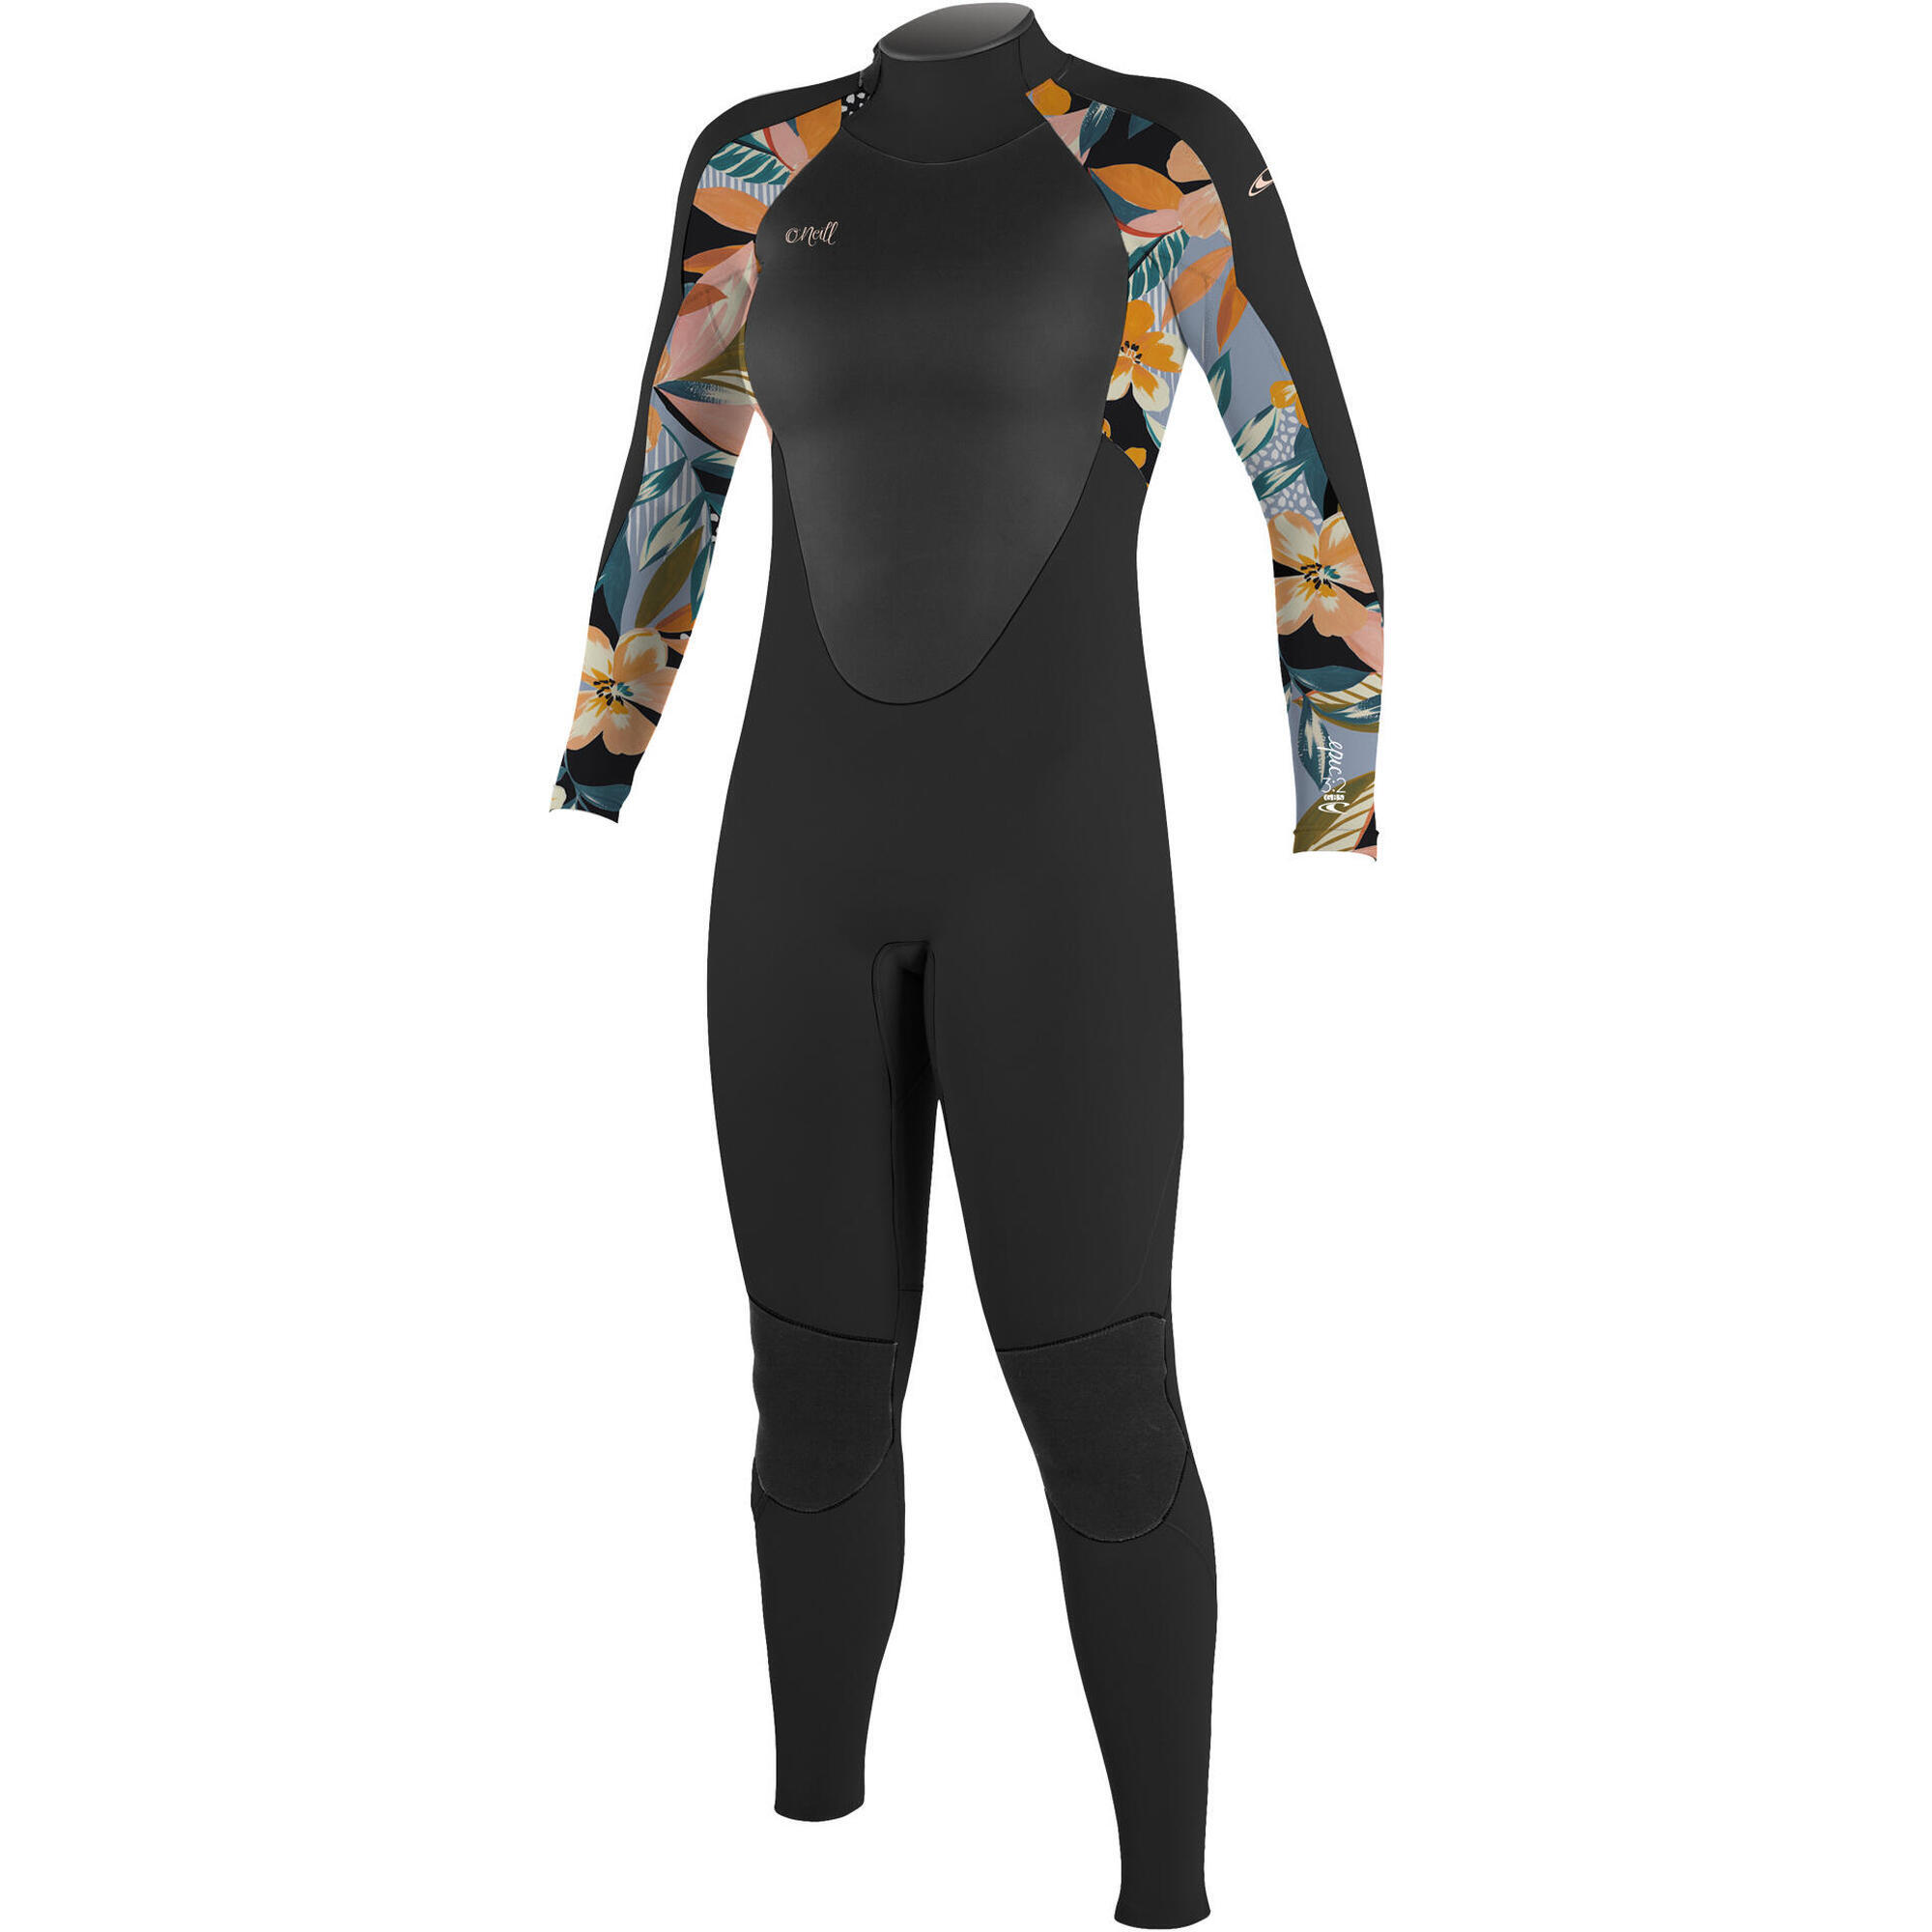 Photos - Wetsuit ONeill O'neill Epic 4/3mm Back Zip Gbs  - / Demiflor 